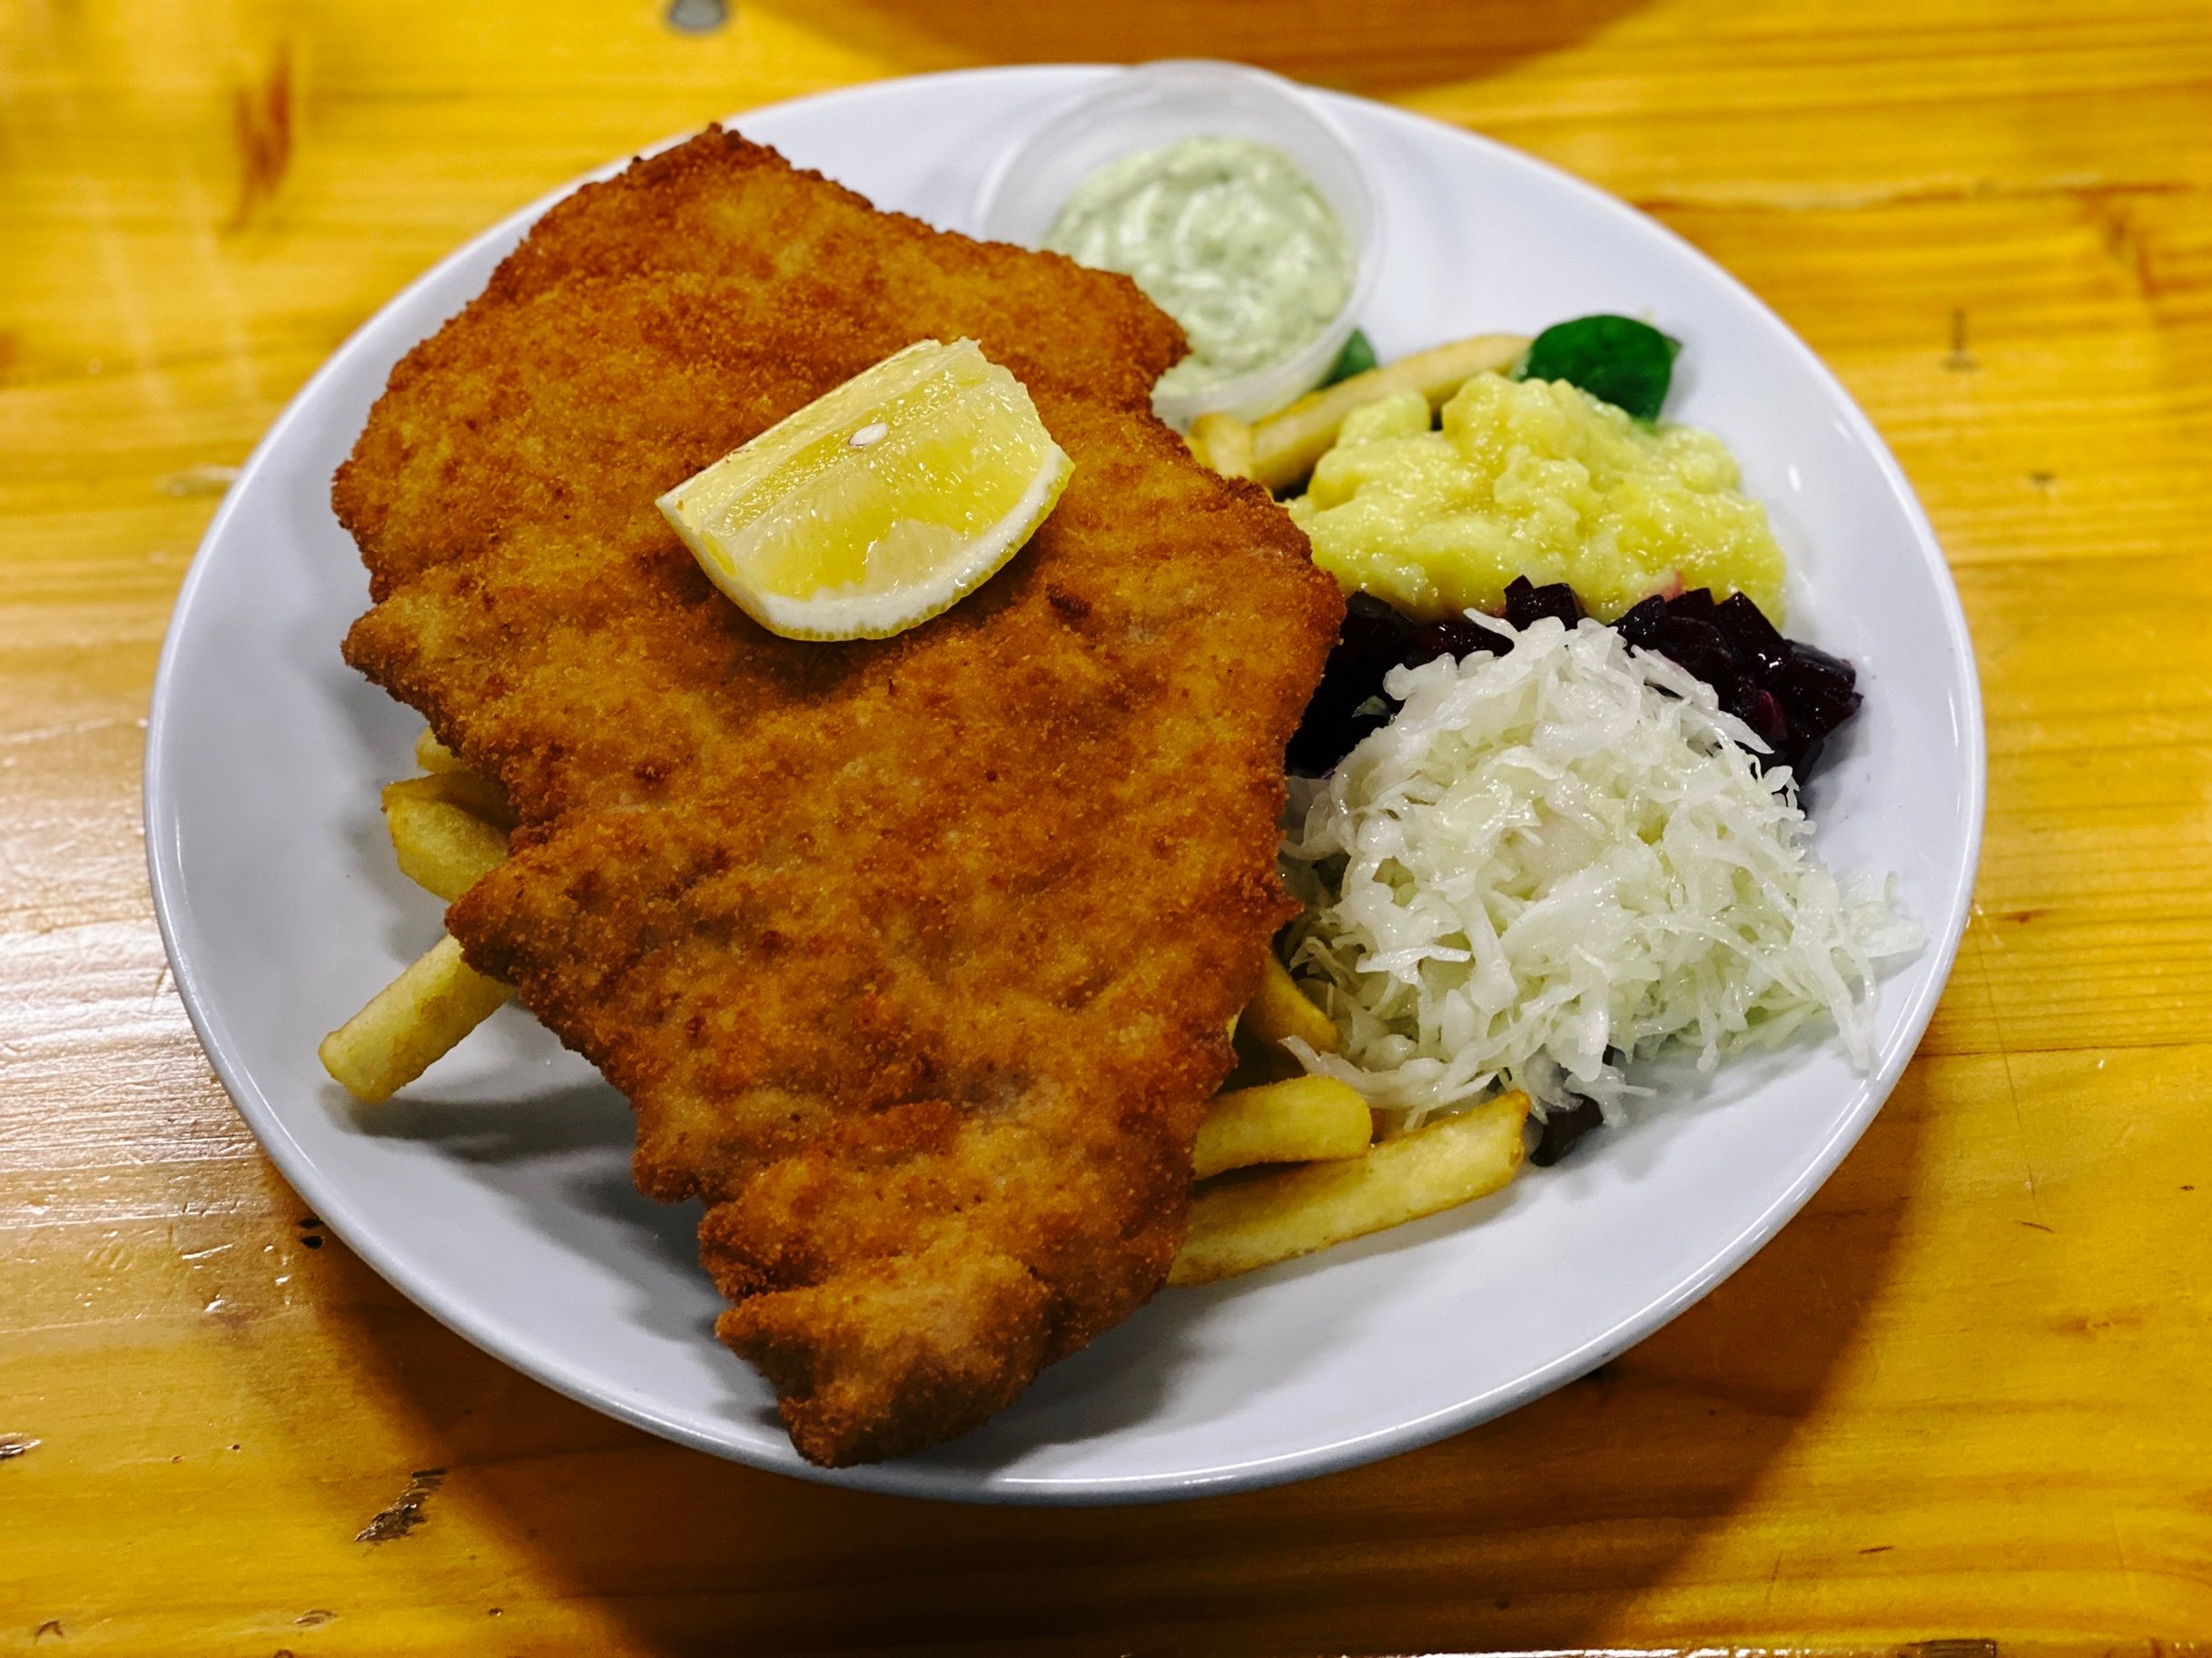 A photo of a pork schnitzel on top of chips, with some sort of pickled cabbage (it didn't taste like sauerkraut) and pickled beetroot things with a pasta salad thing as well.